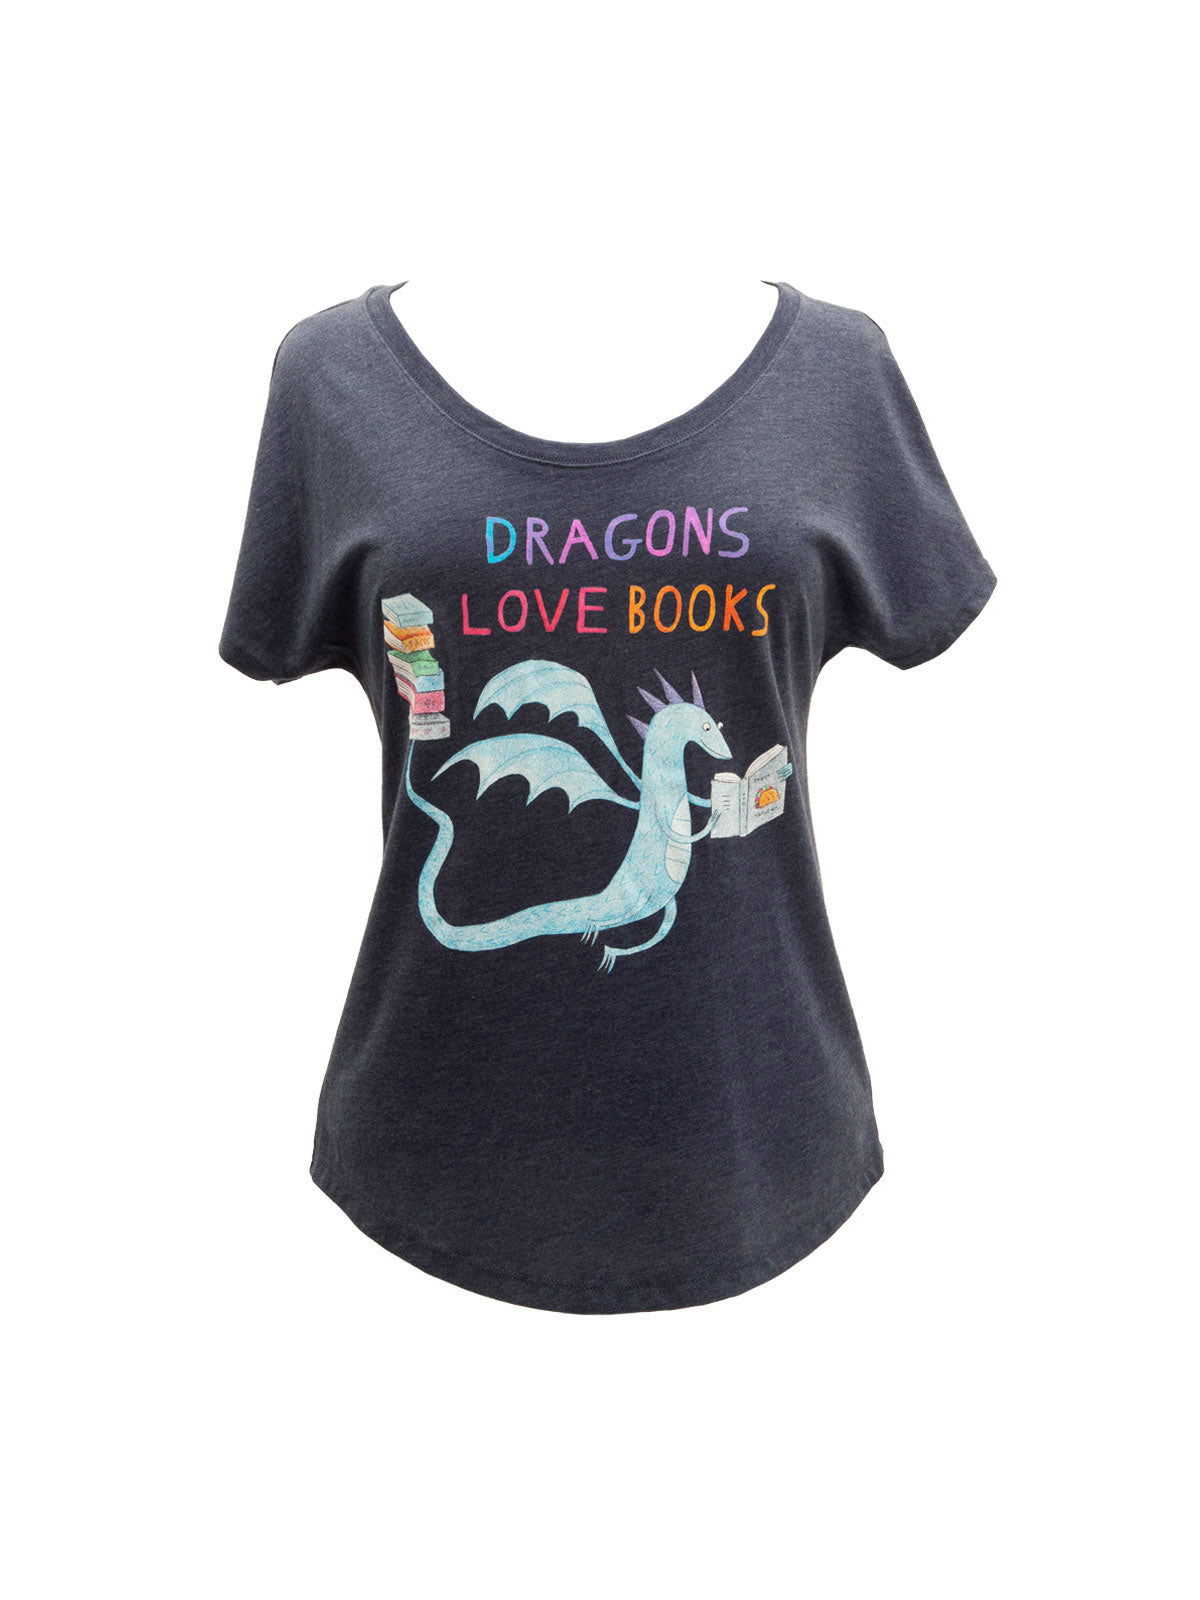 Dragons Love Books and Tacos